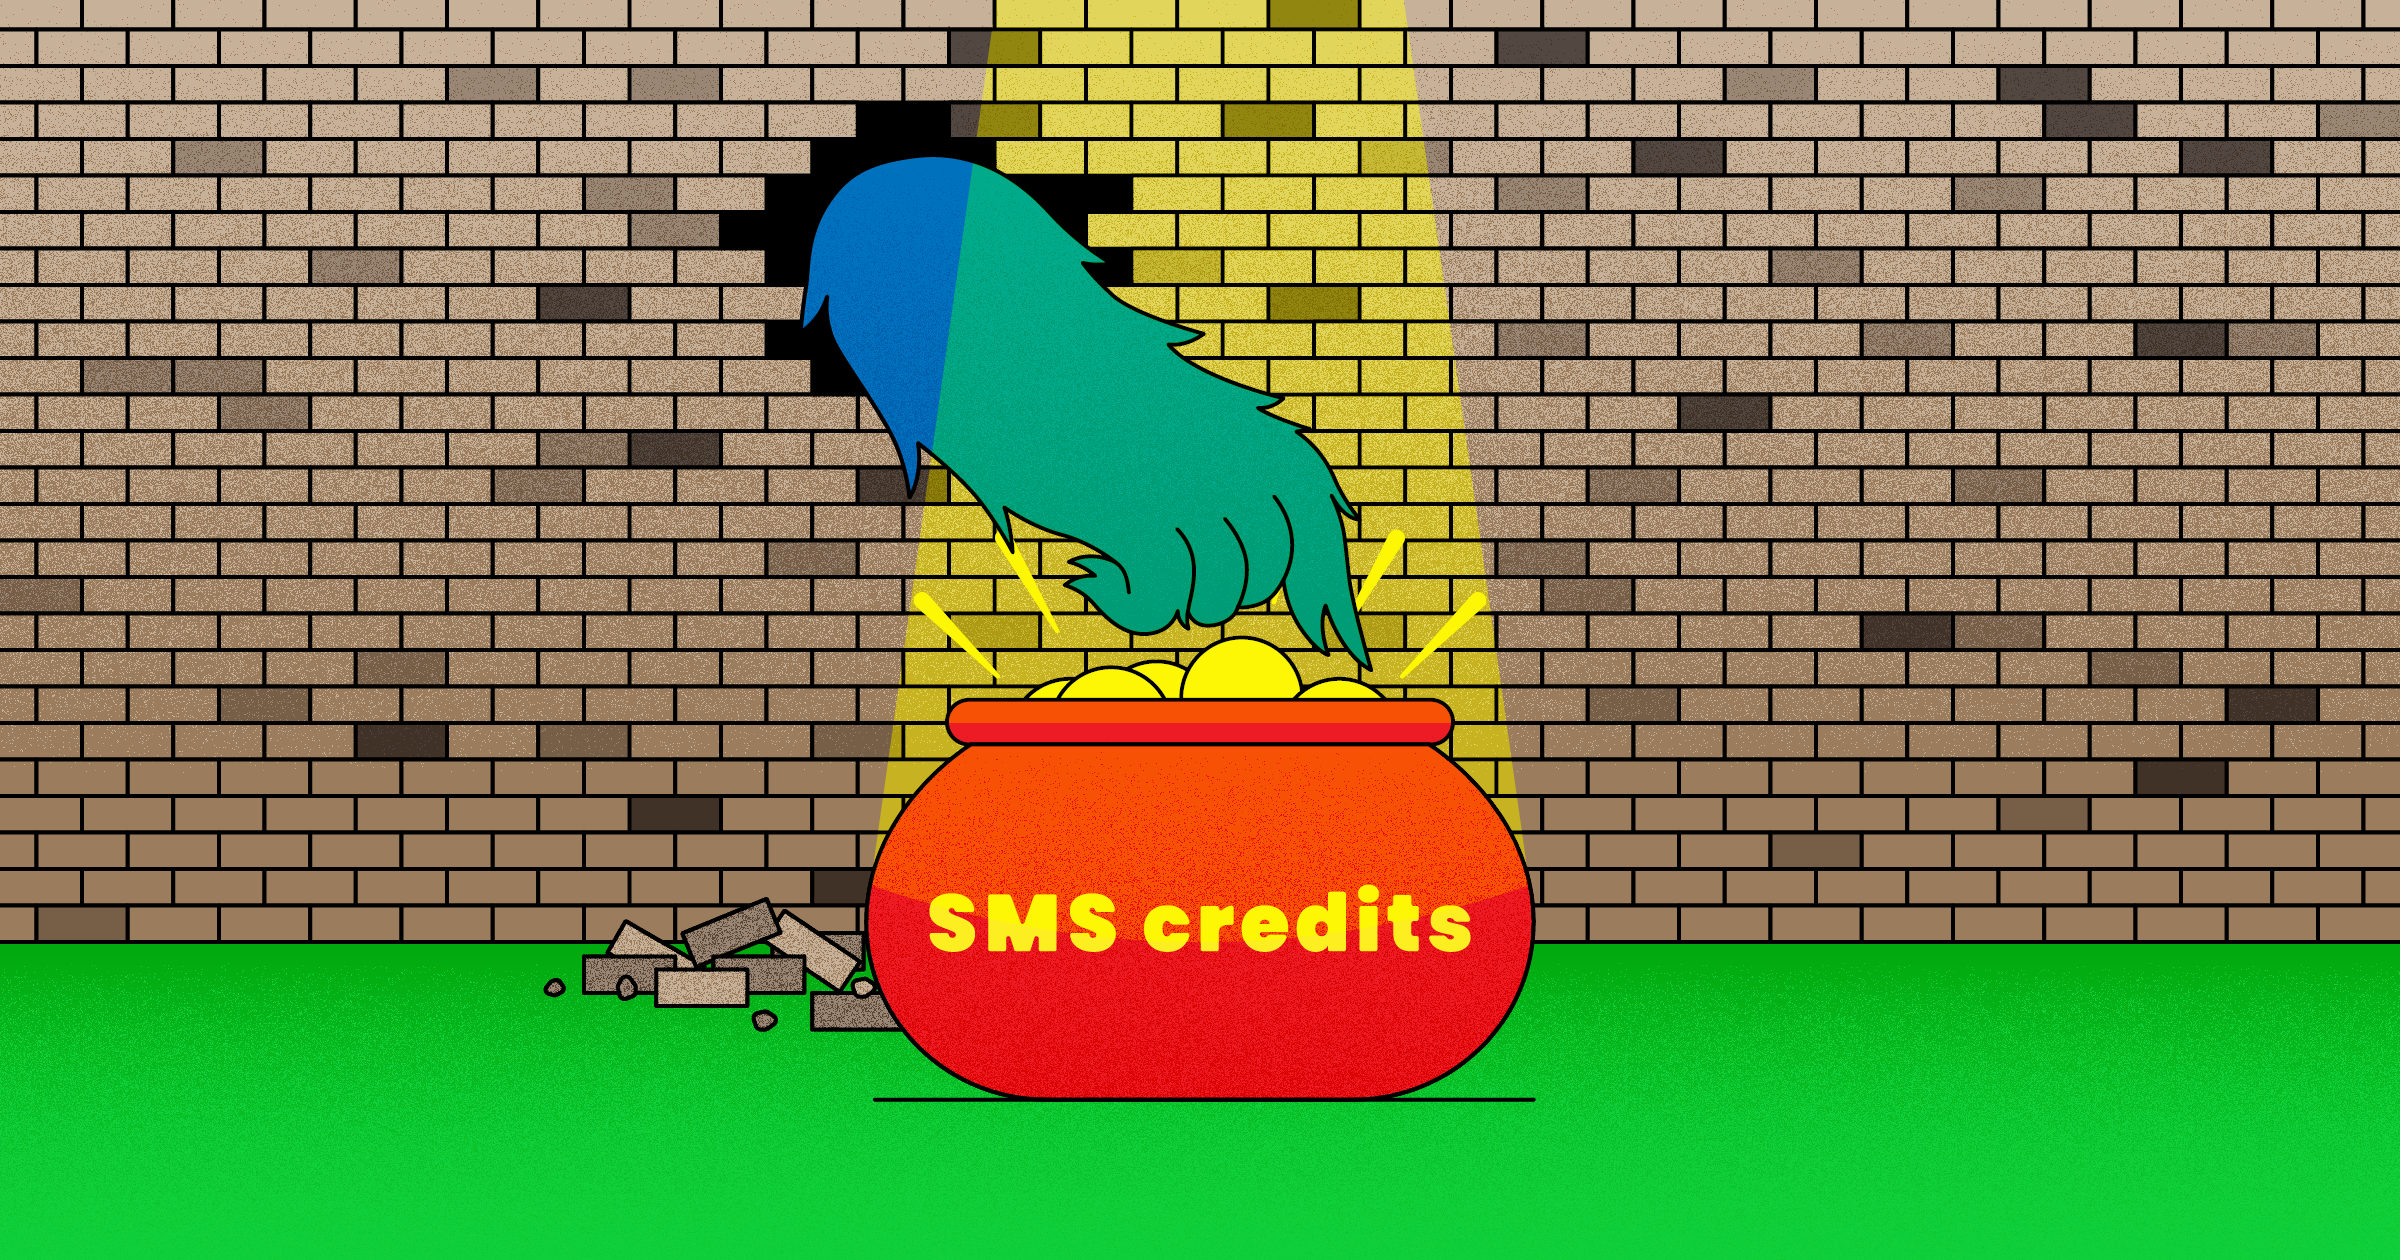 New in Get Reviews: SMS credit allocation